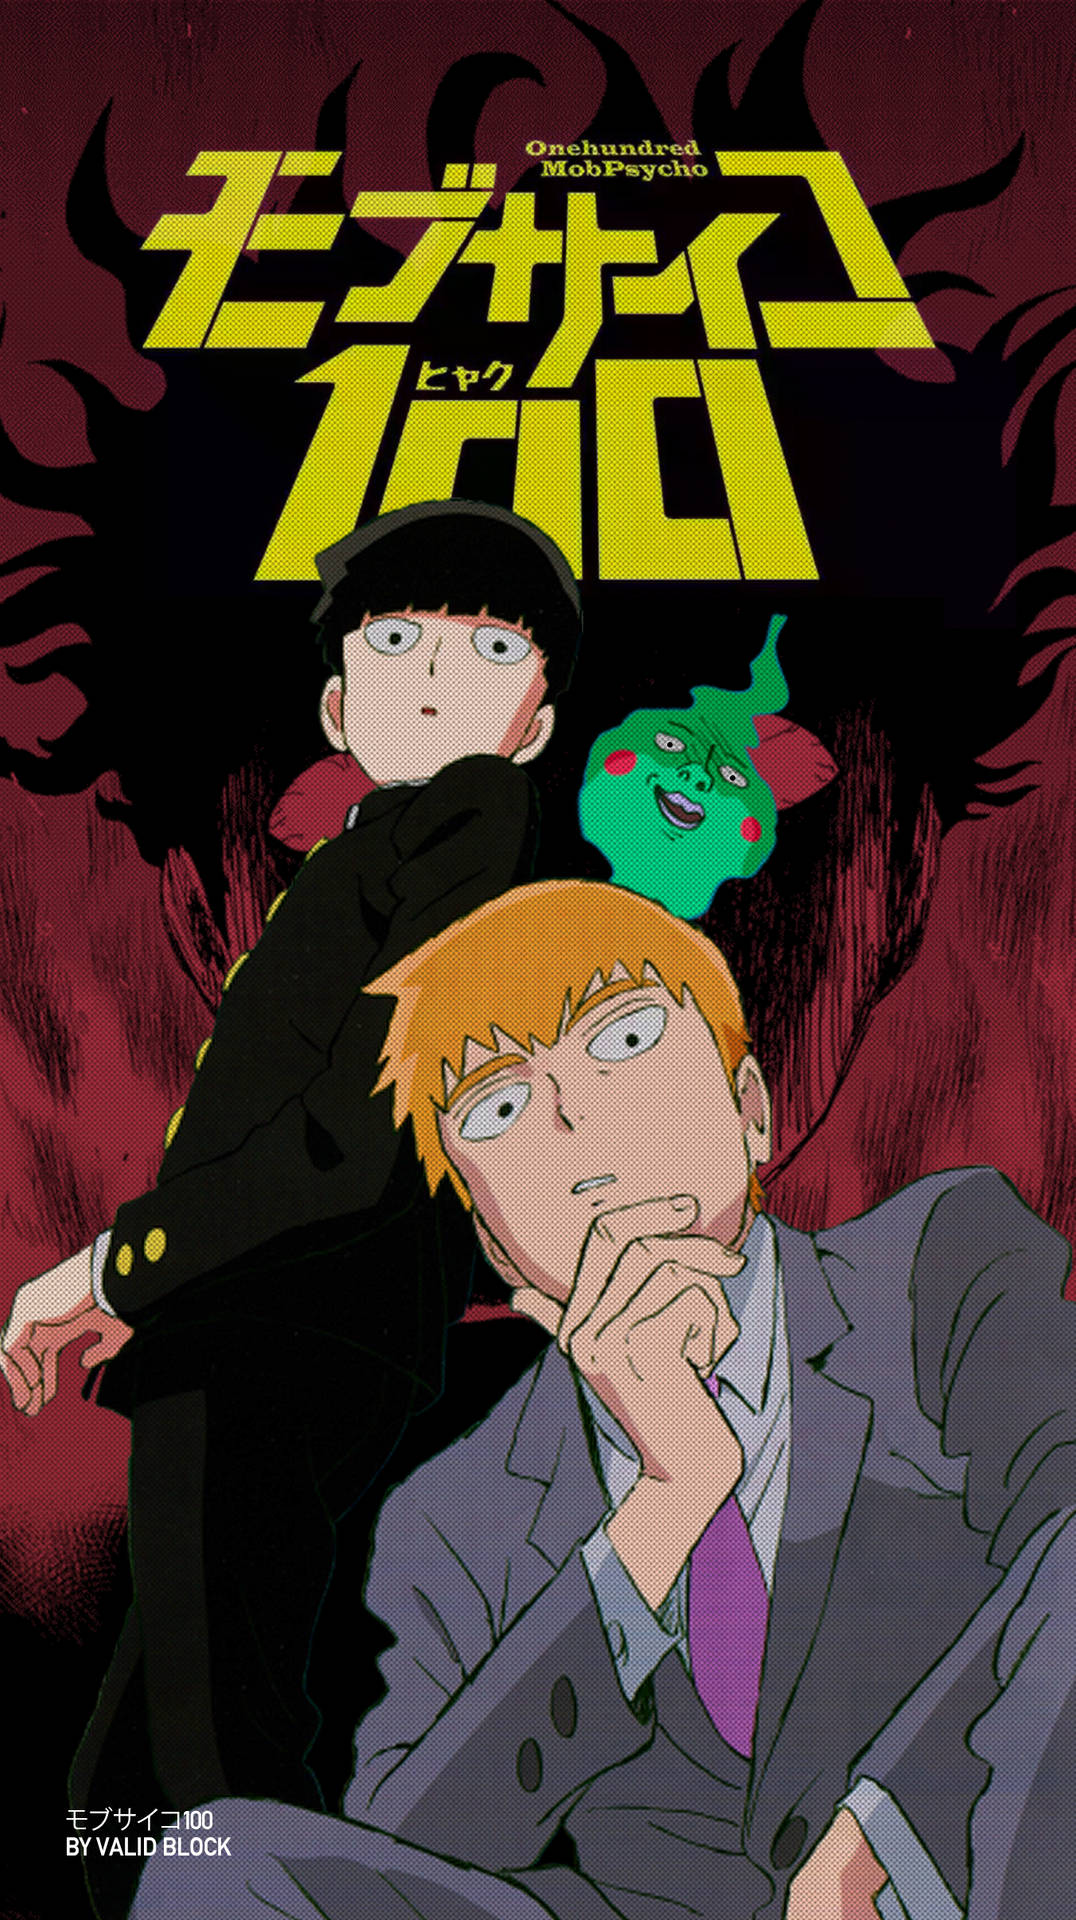 Mob Psycho 100 - Psychic battles and adolescent growth Wallpaper